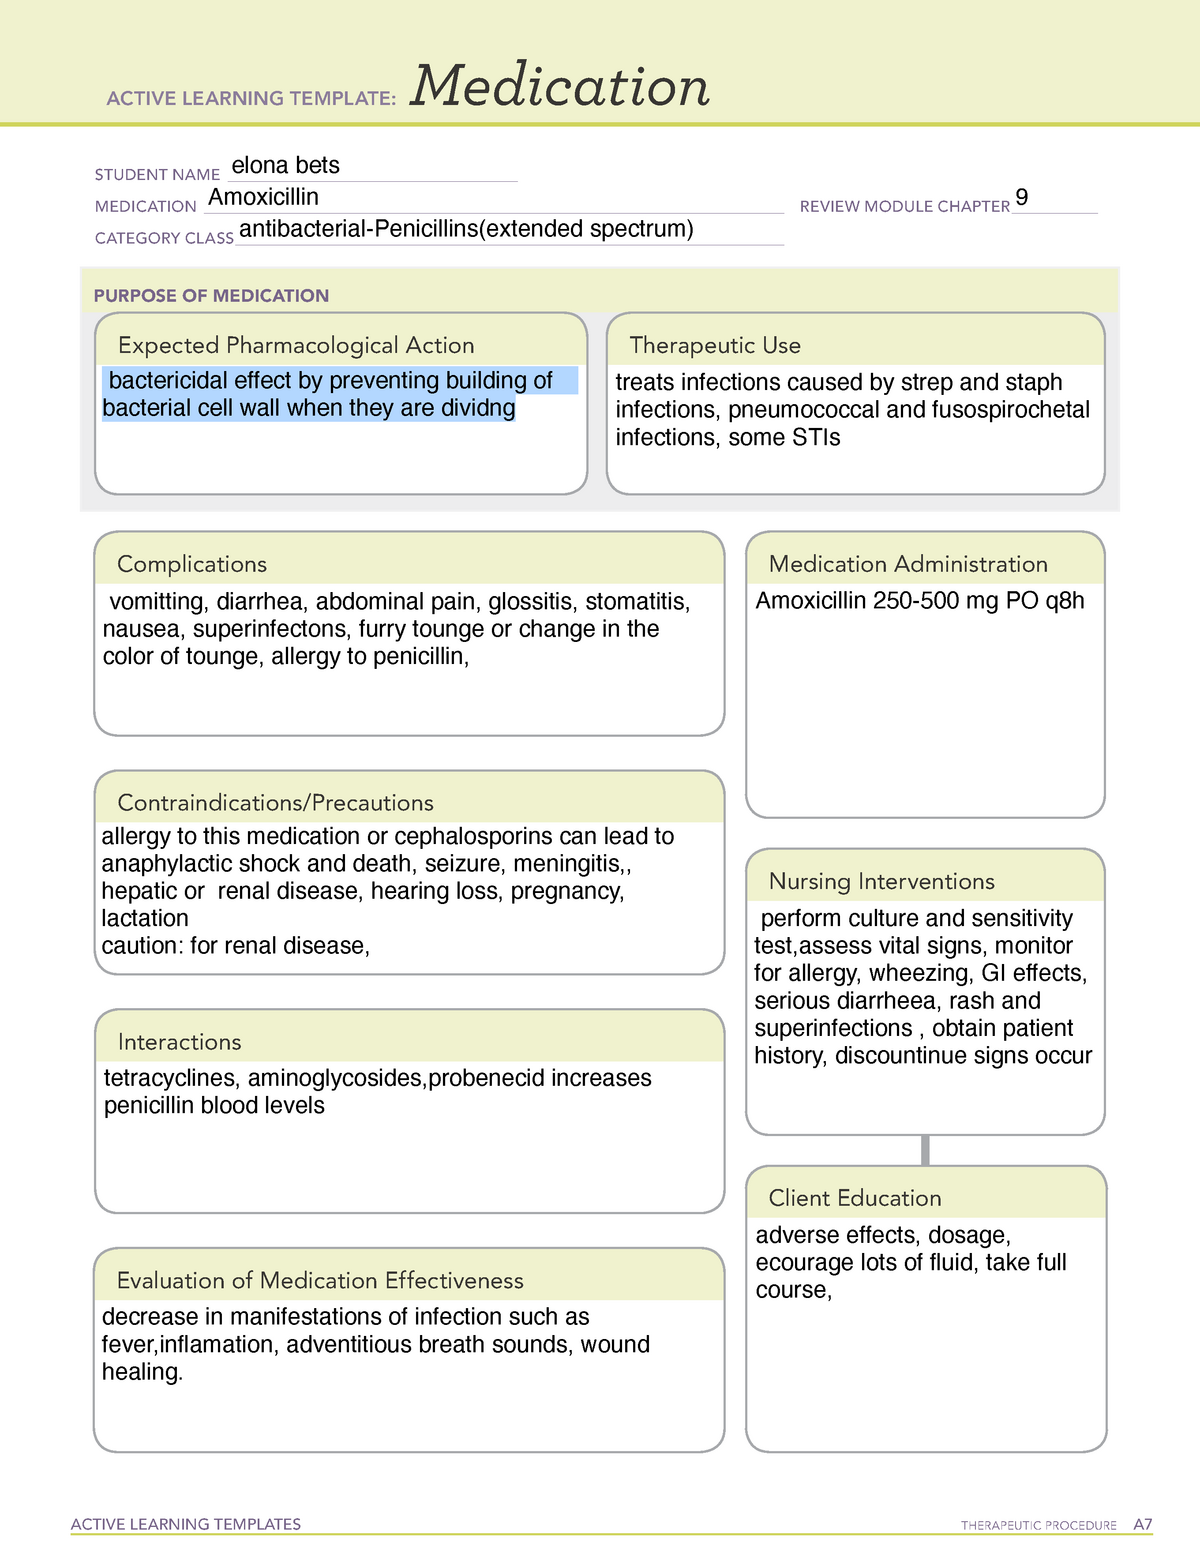 Amoxicillin pharmacology graded 100 assignment ACTIVE LEARNING